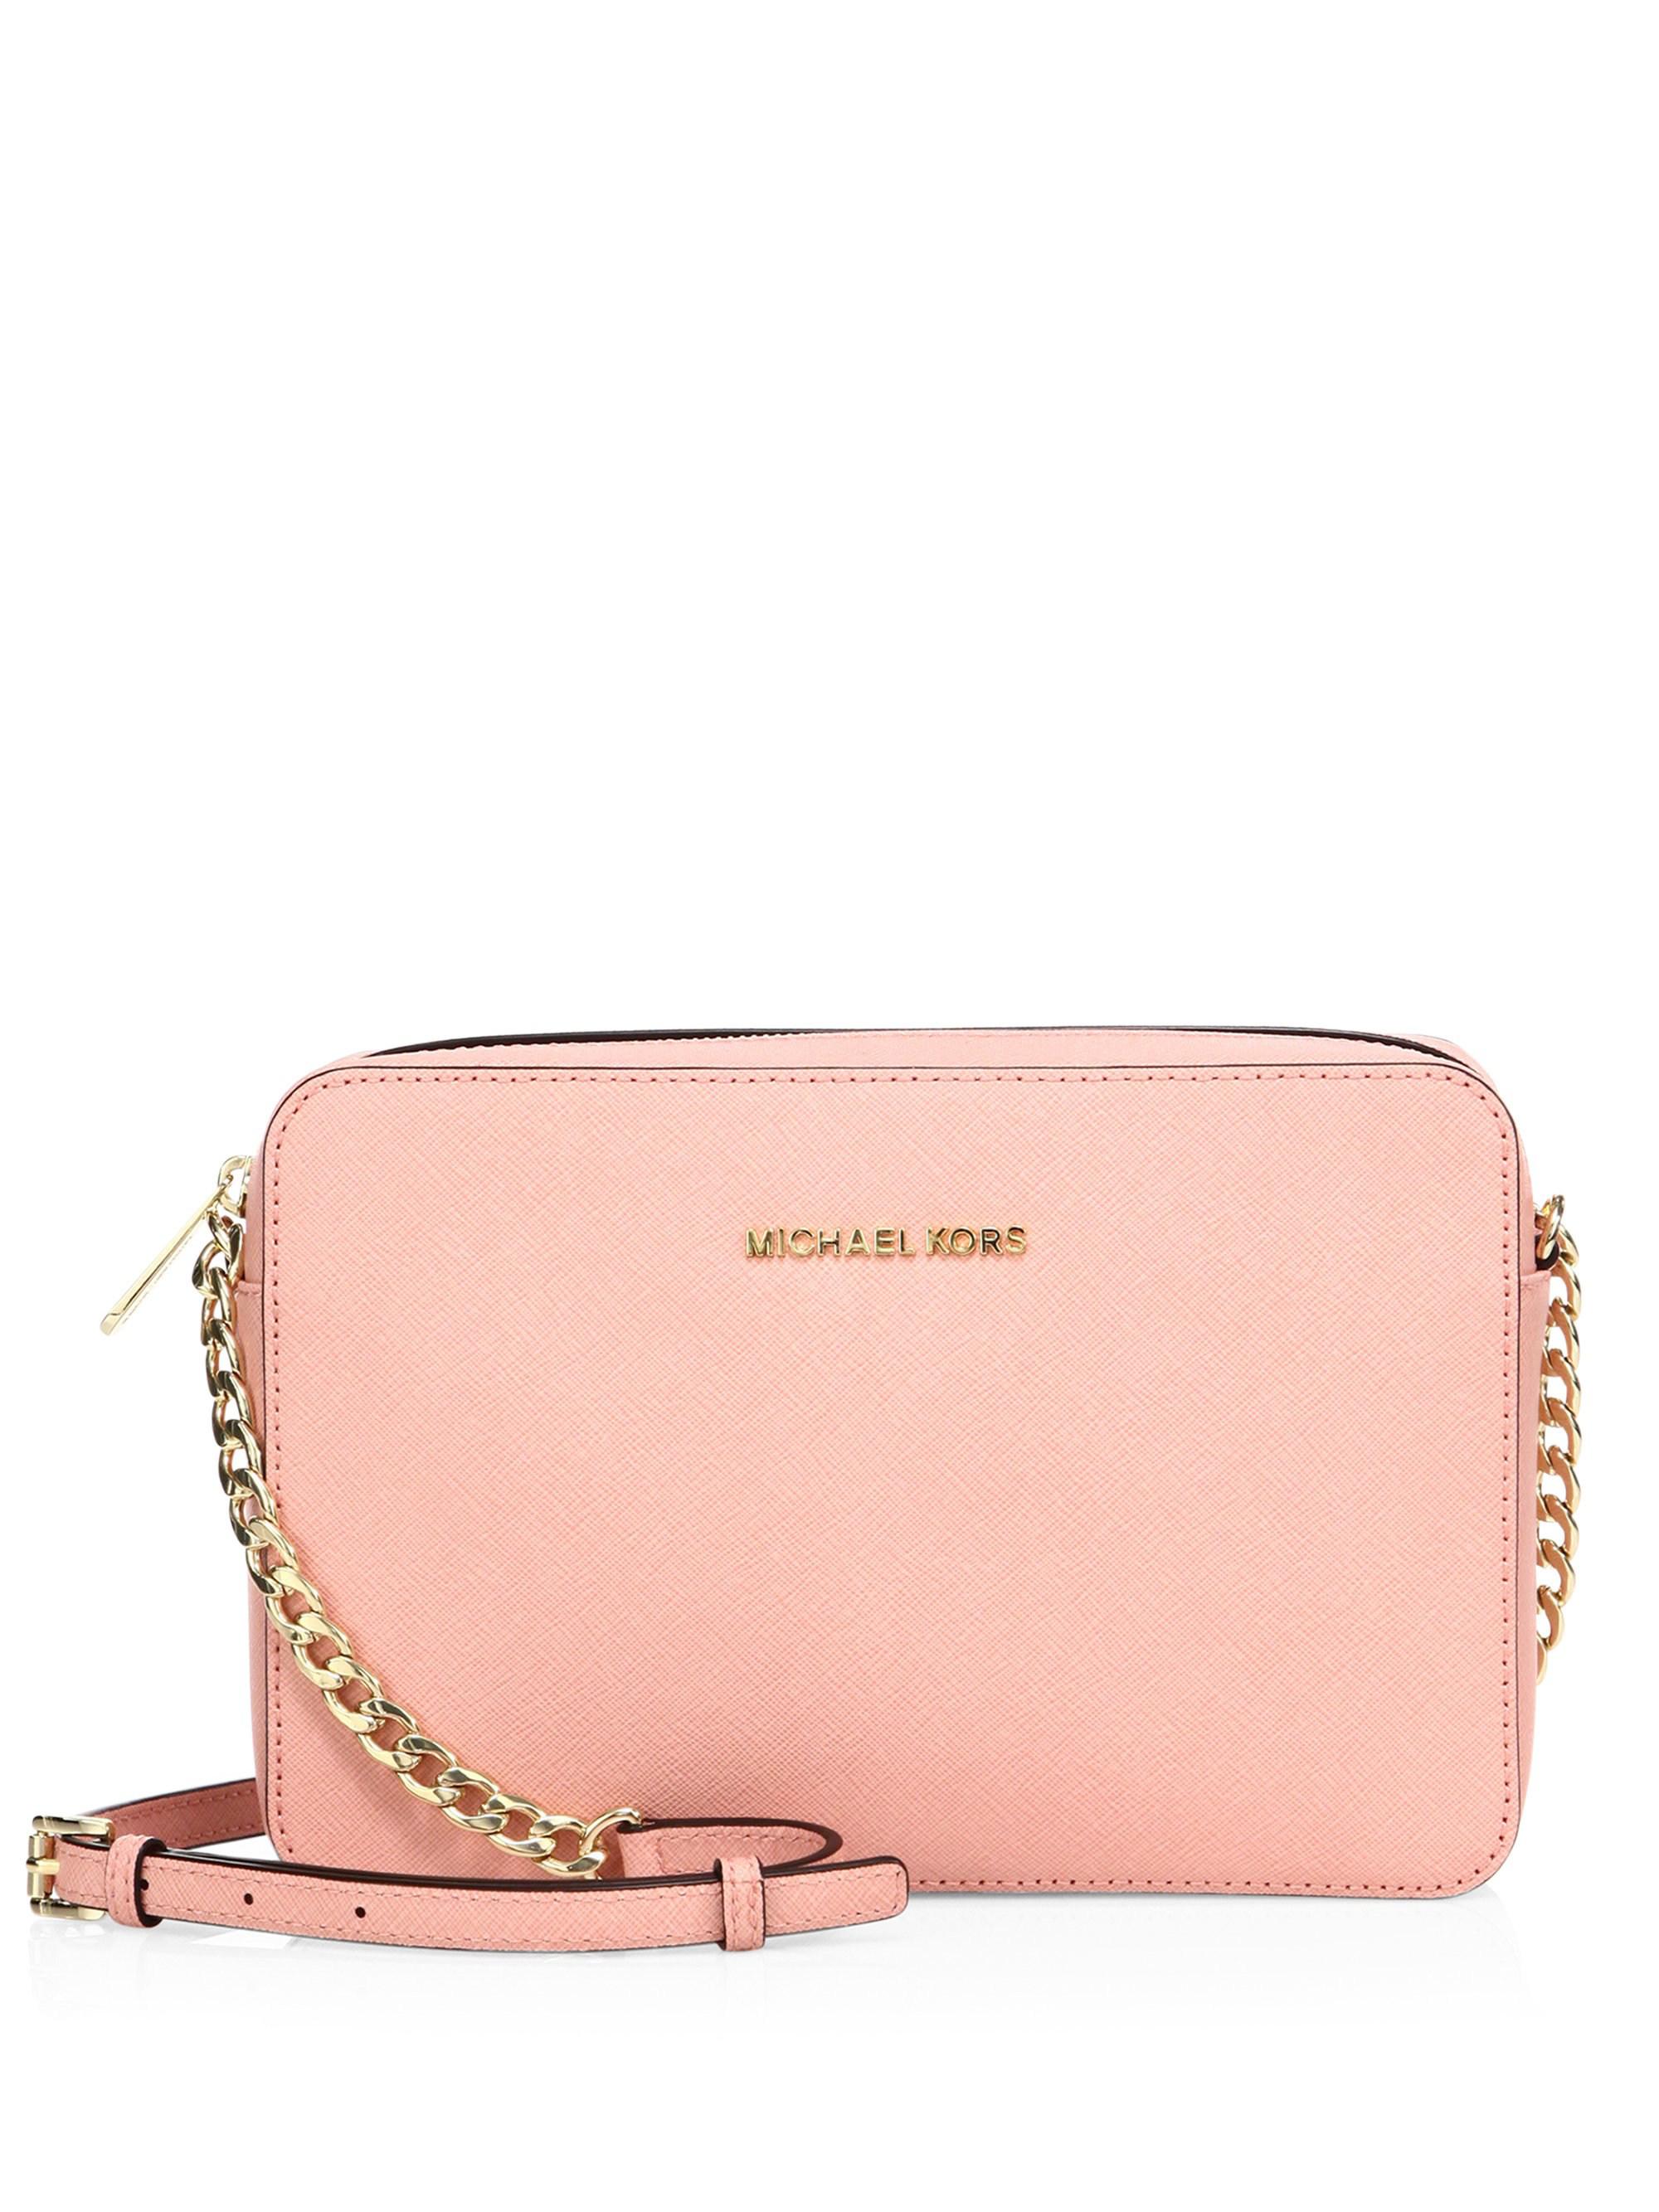 Michael Kors Jet Set Large Saffiano Leather Crossbody Bag in Pale Pink (Pink) - Lyst